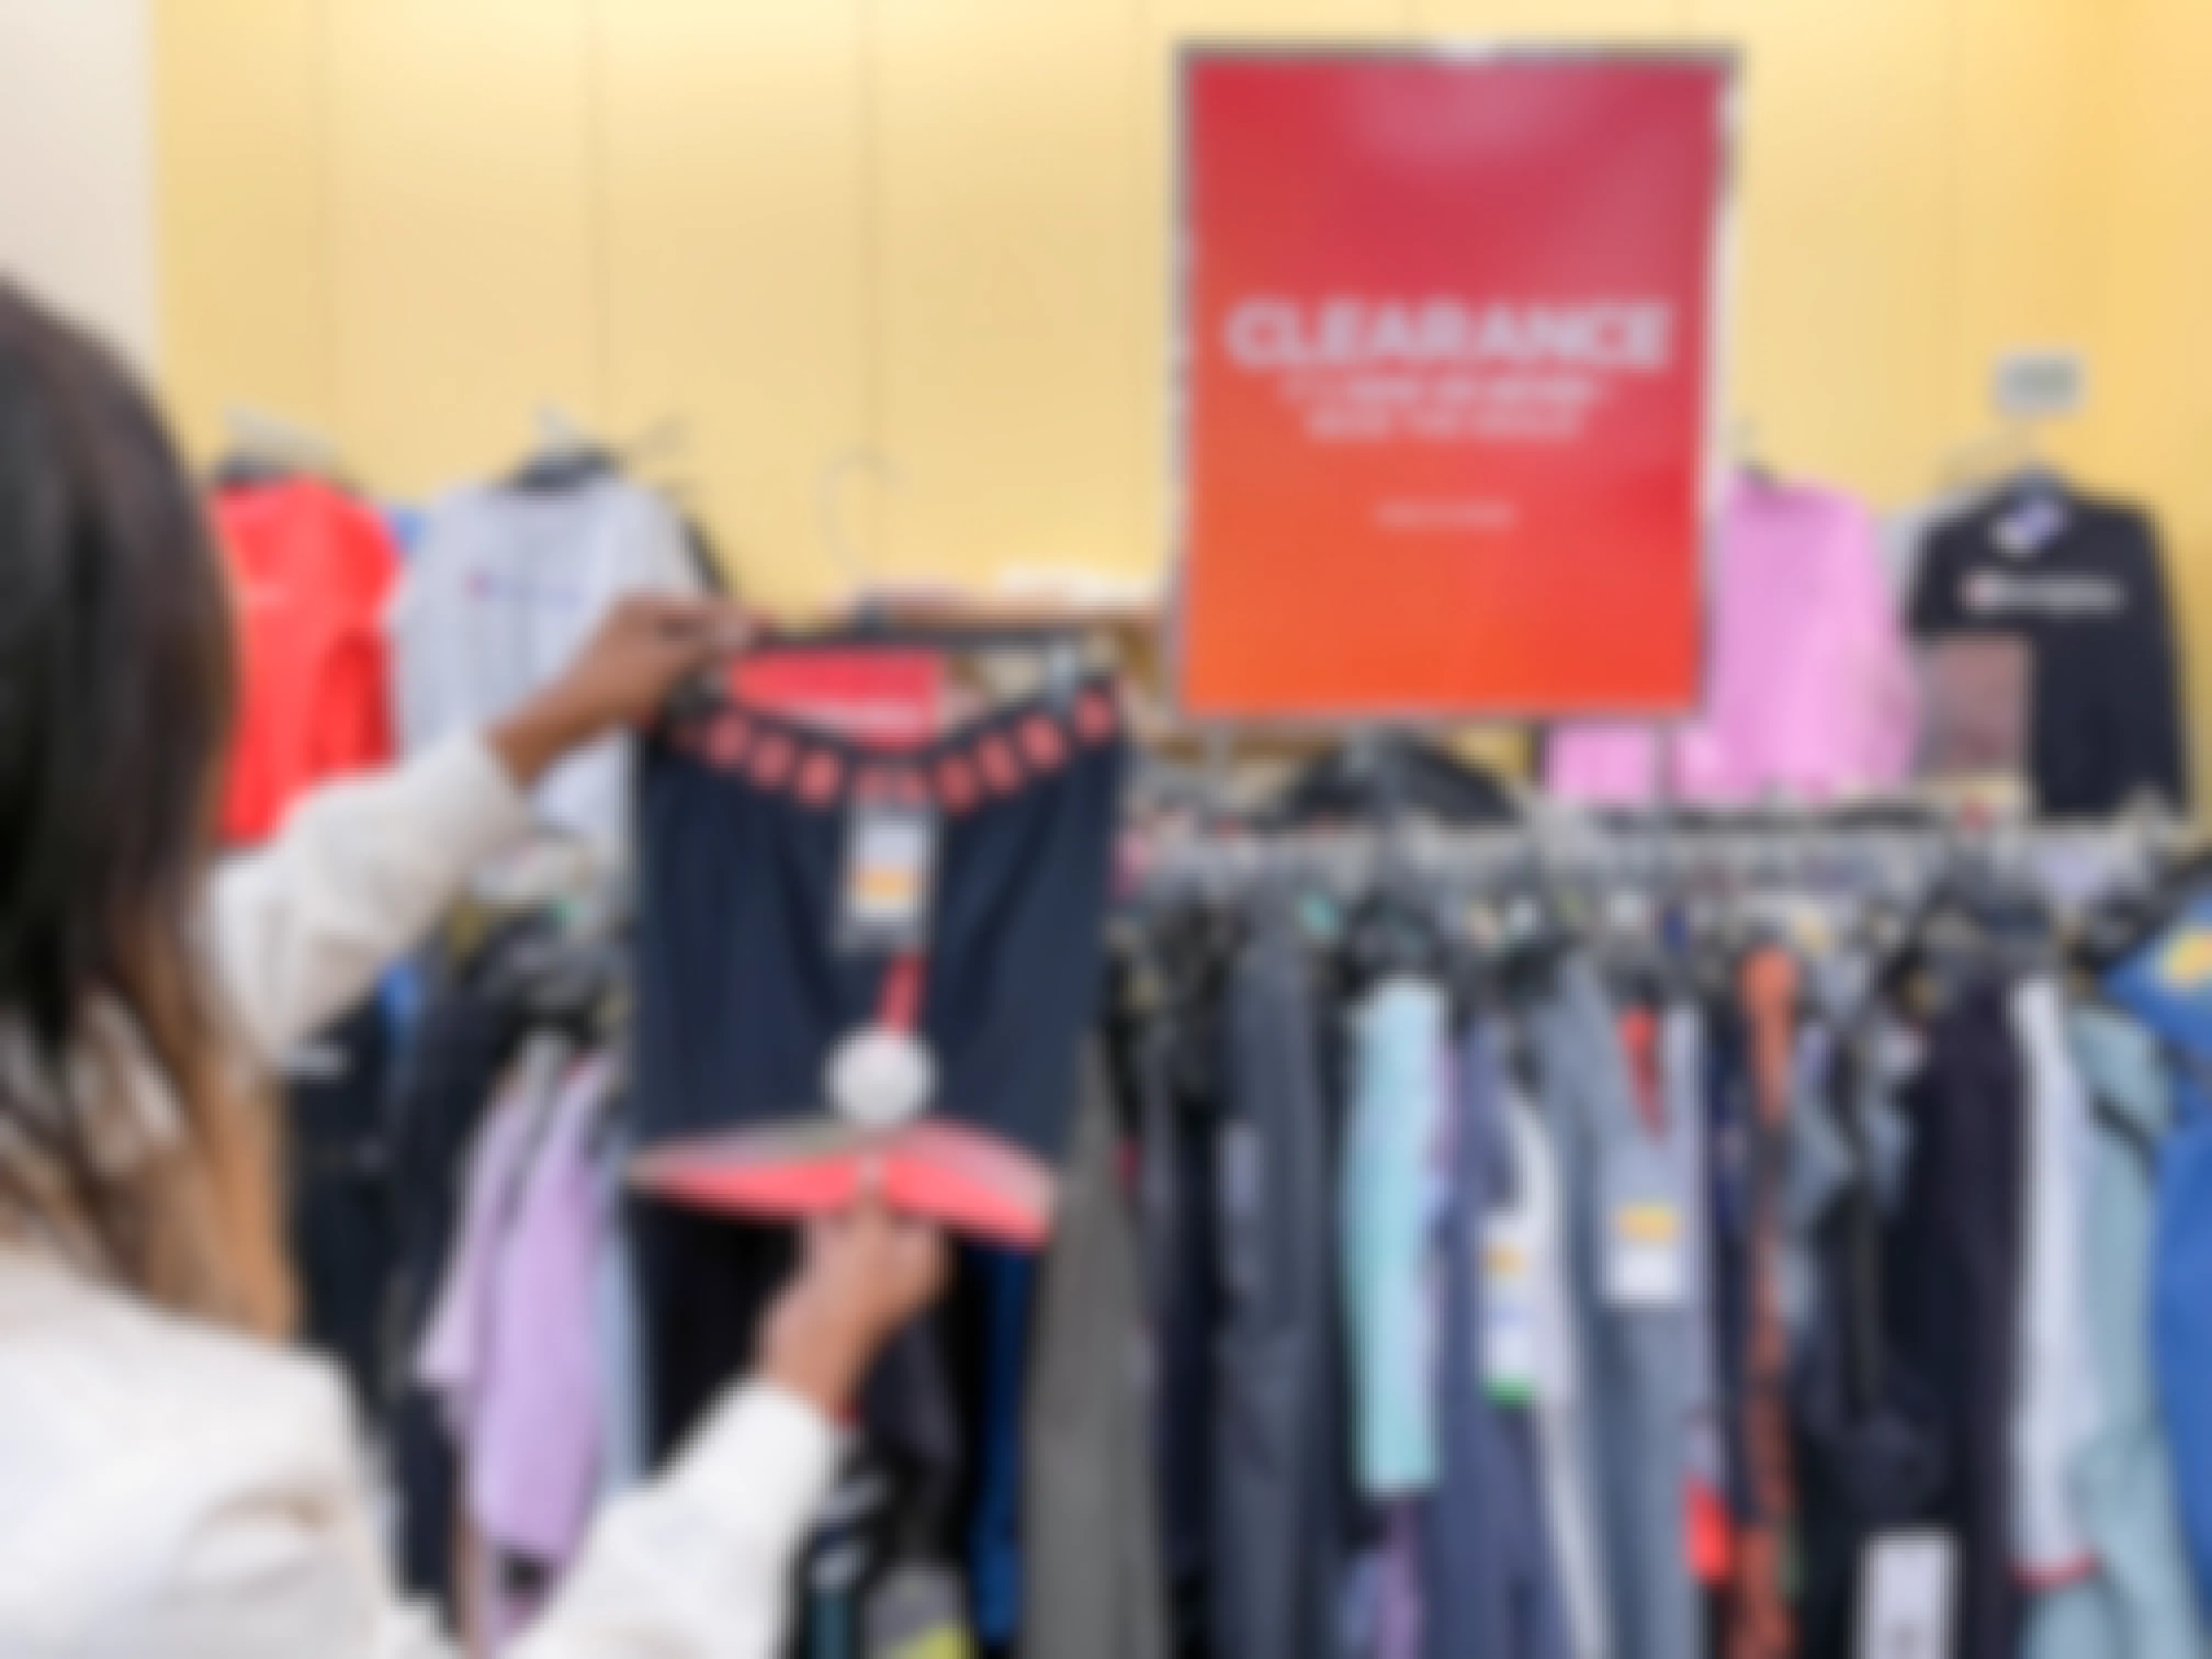 A woman holding a pair of Under Armour shorts next to a clearance sign